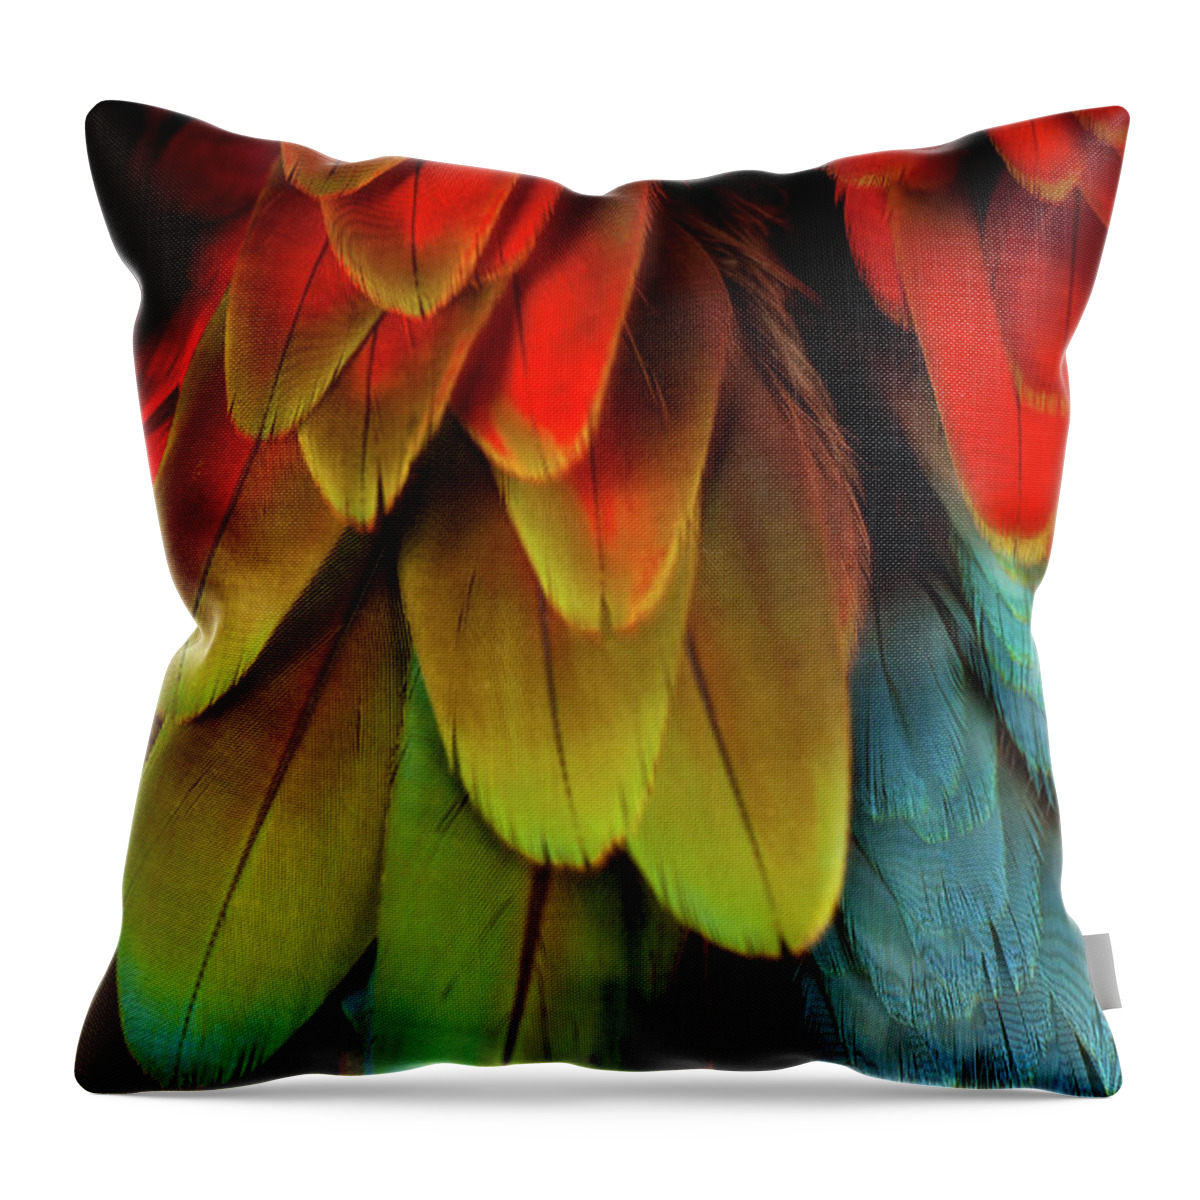 Animal Themes Throw Pillow featuring the photograph Feathers On A Scarlet Macaw by Tim Platt